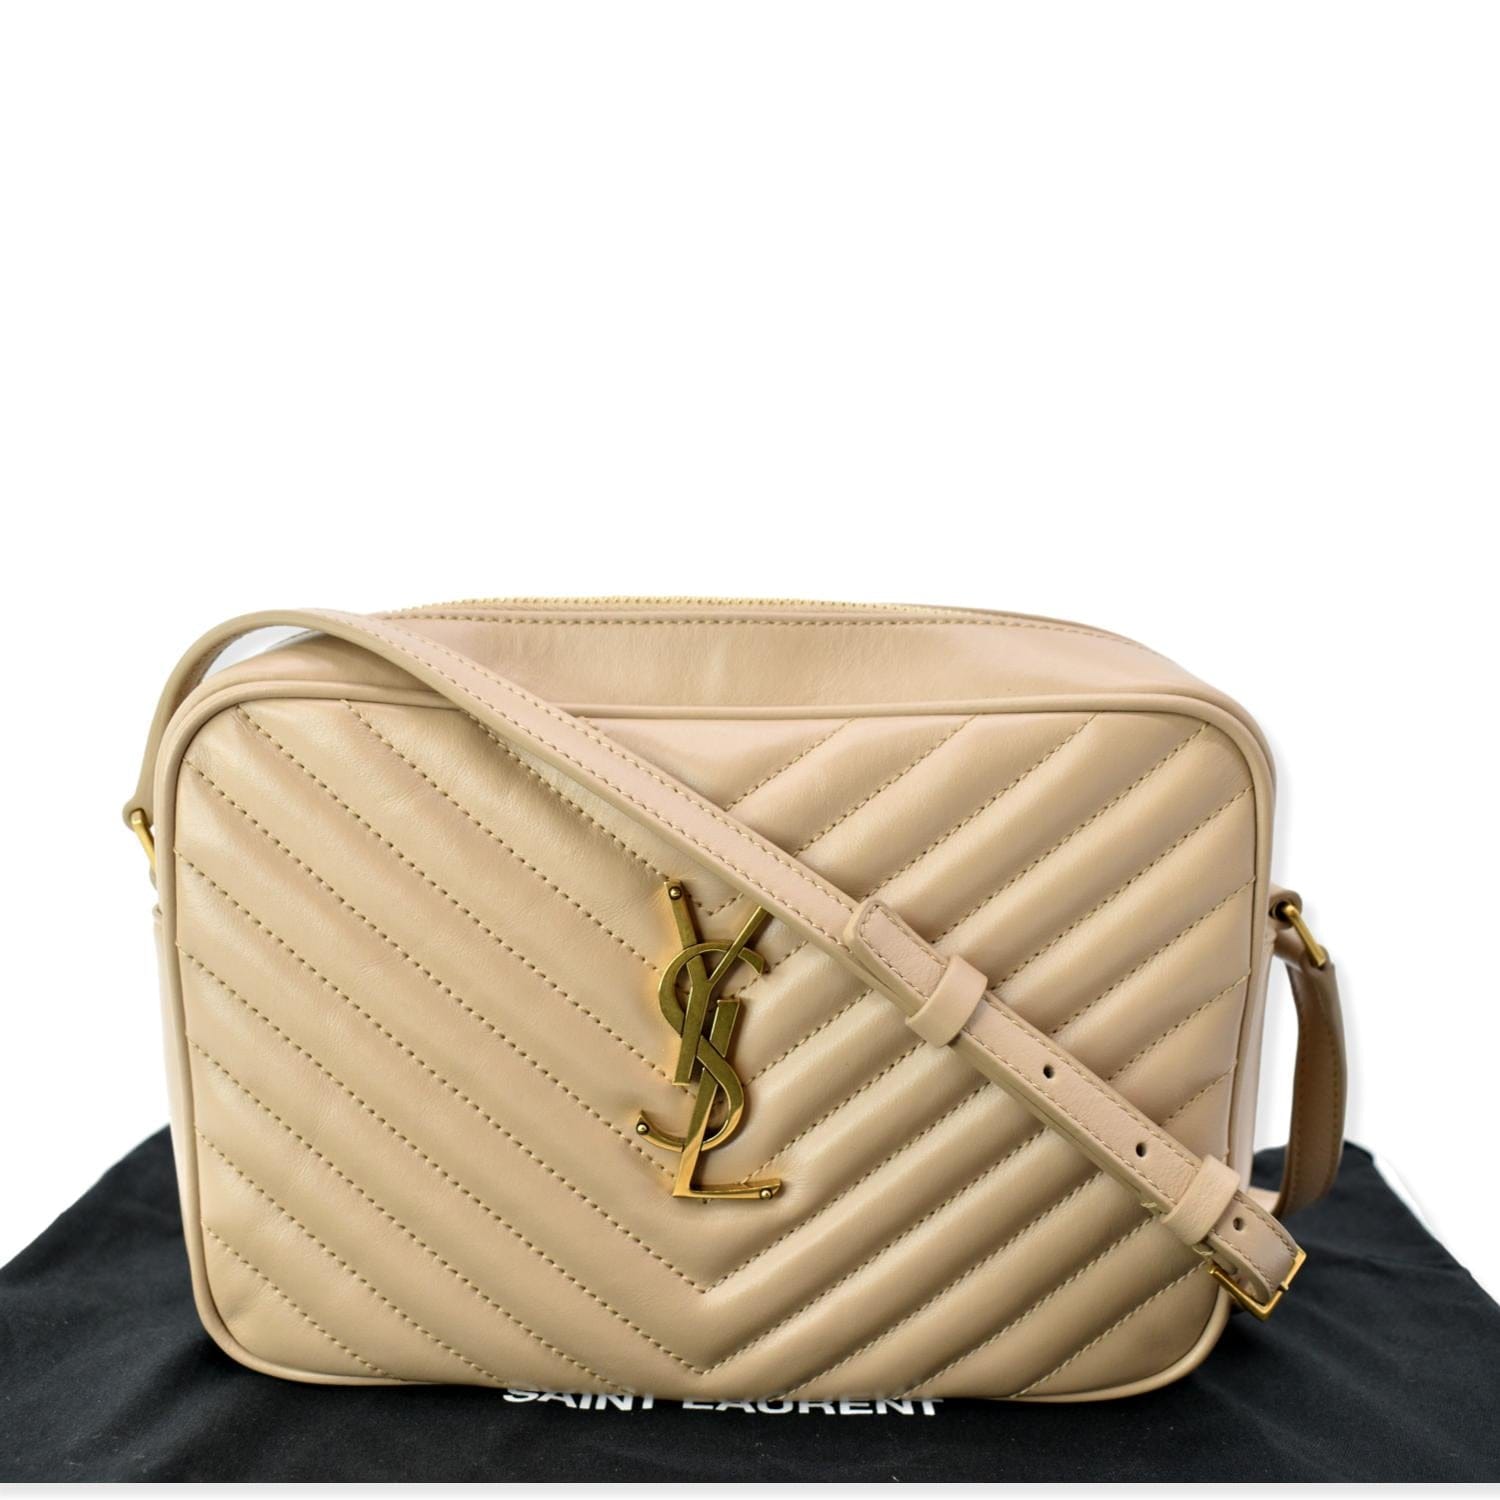 YVES SAINT LAURENT Leather Shopping Tote Bag Beige - 20% OFF